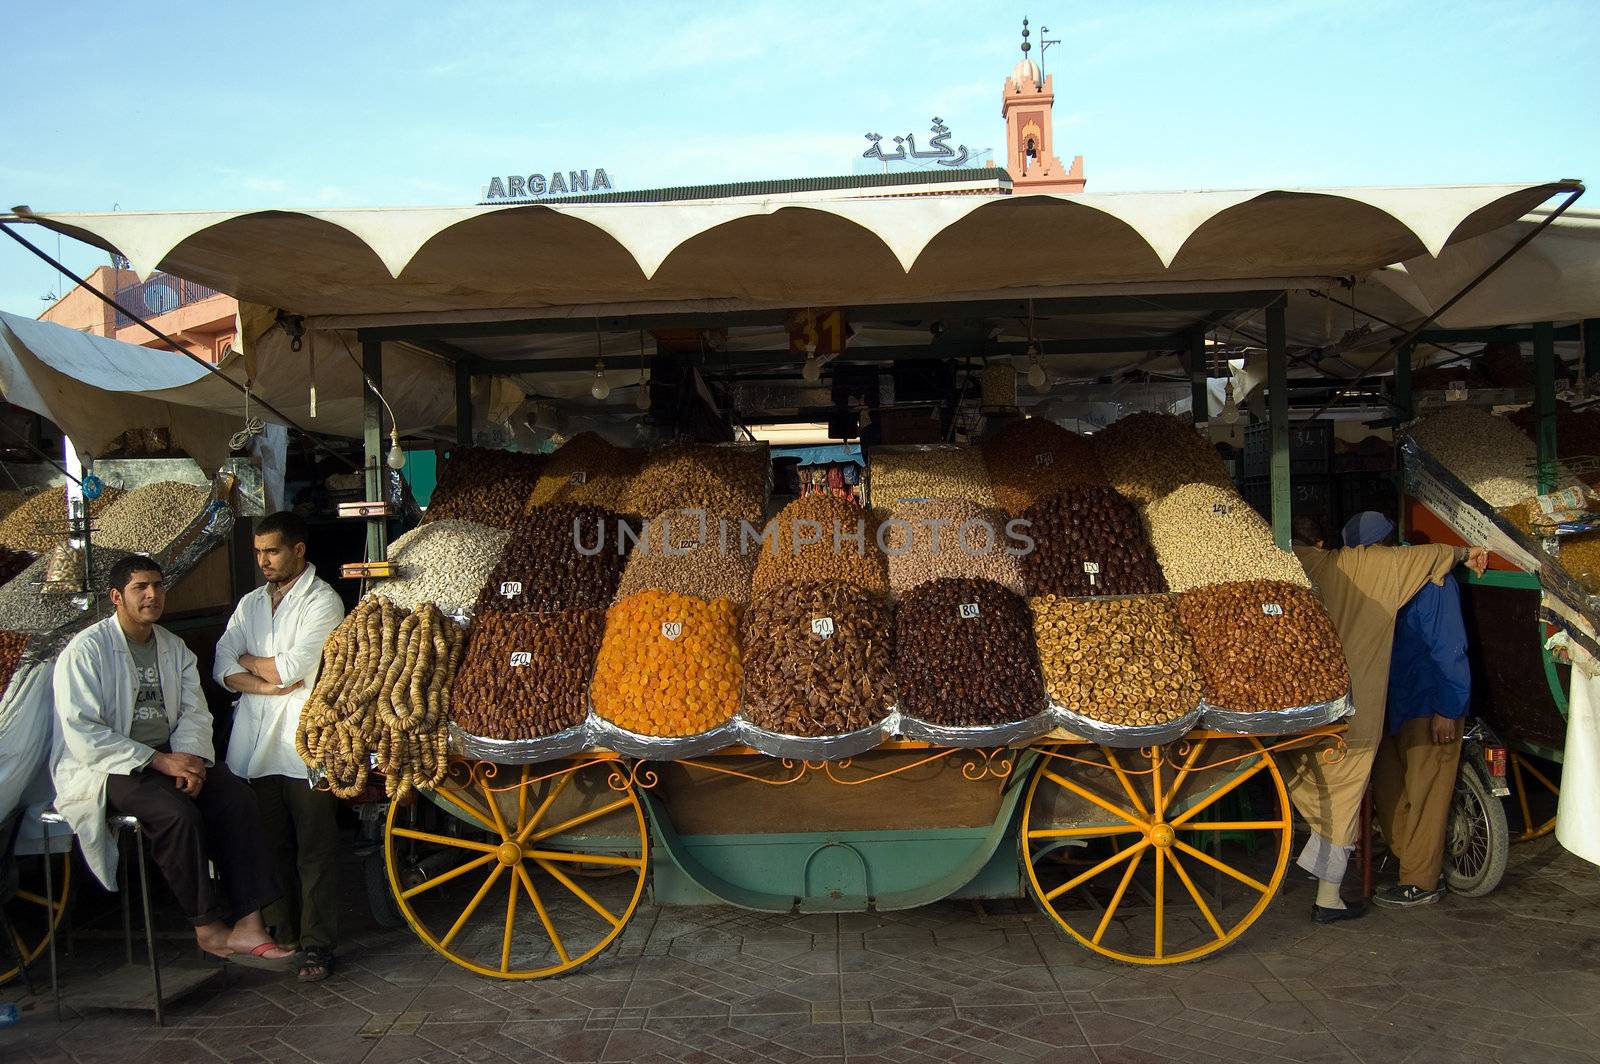 A stand of dried fruit in Djemaa el Fna square, Marrakesh